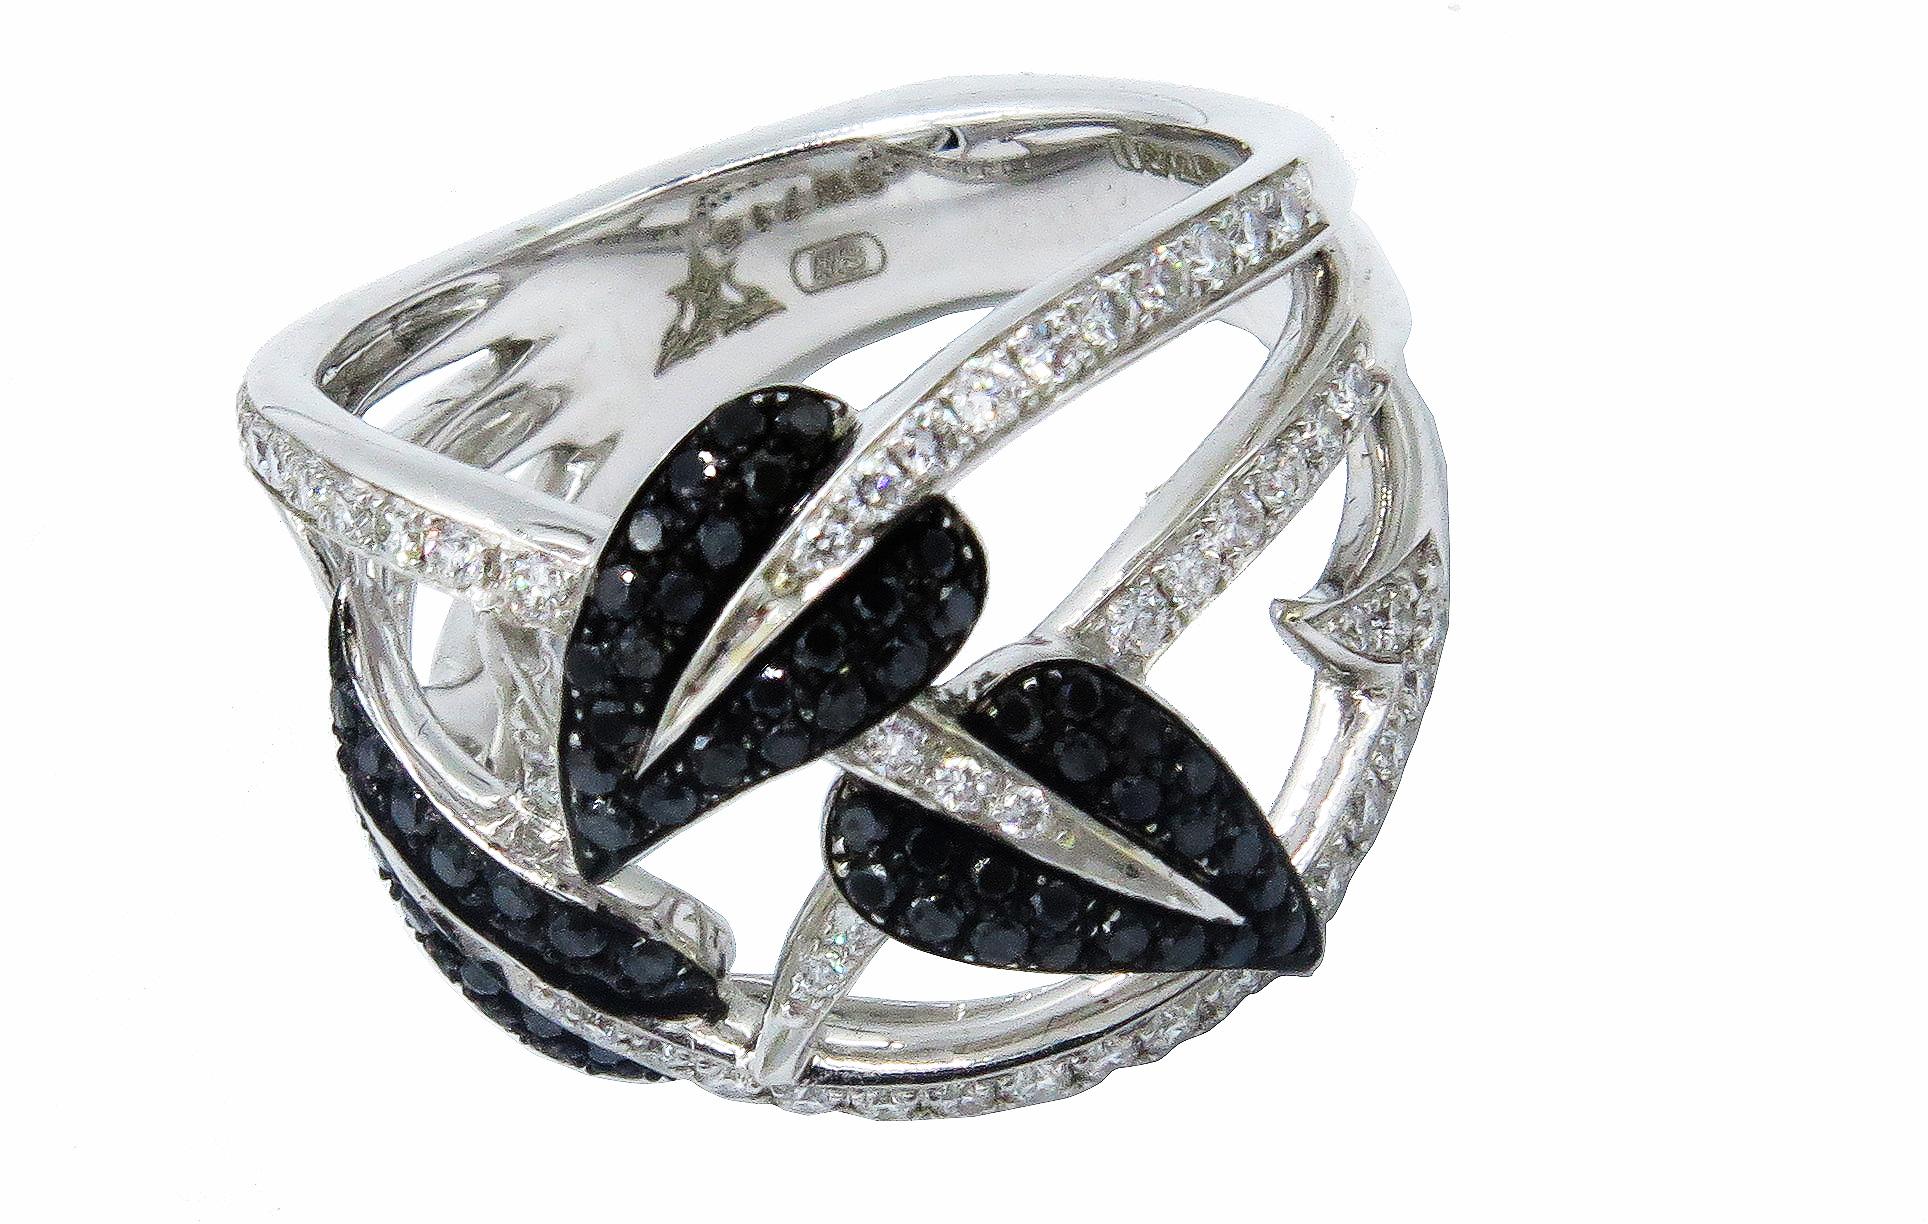 Gorgeous Stephen Webster 18k white gold ring set with beautiful sparkling white and black pave diamonds. This unique ring design is from Webster’s famous 